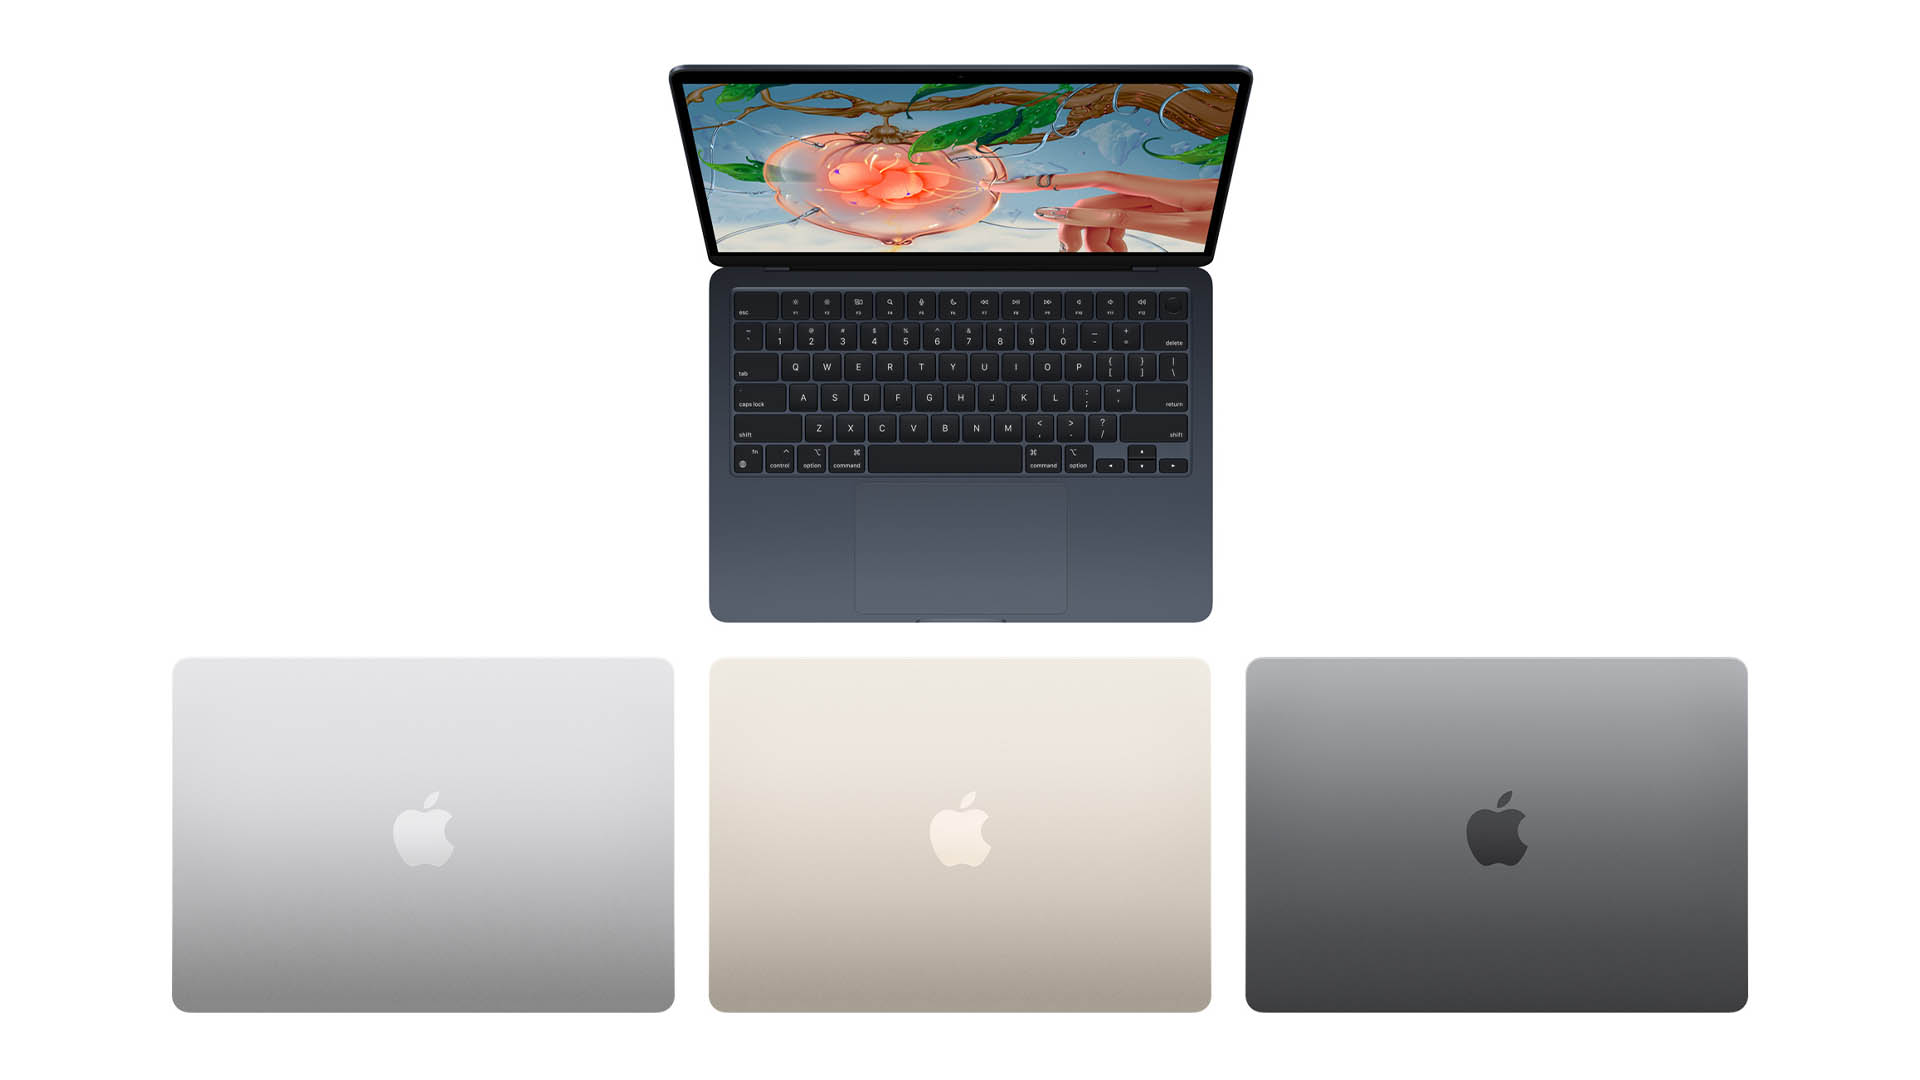 13-inch macbook air color options